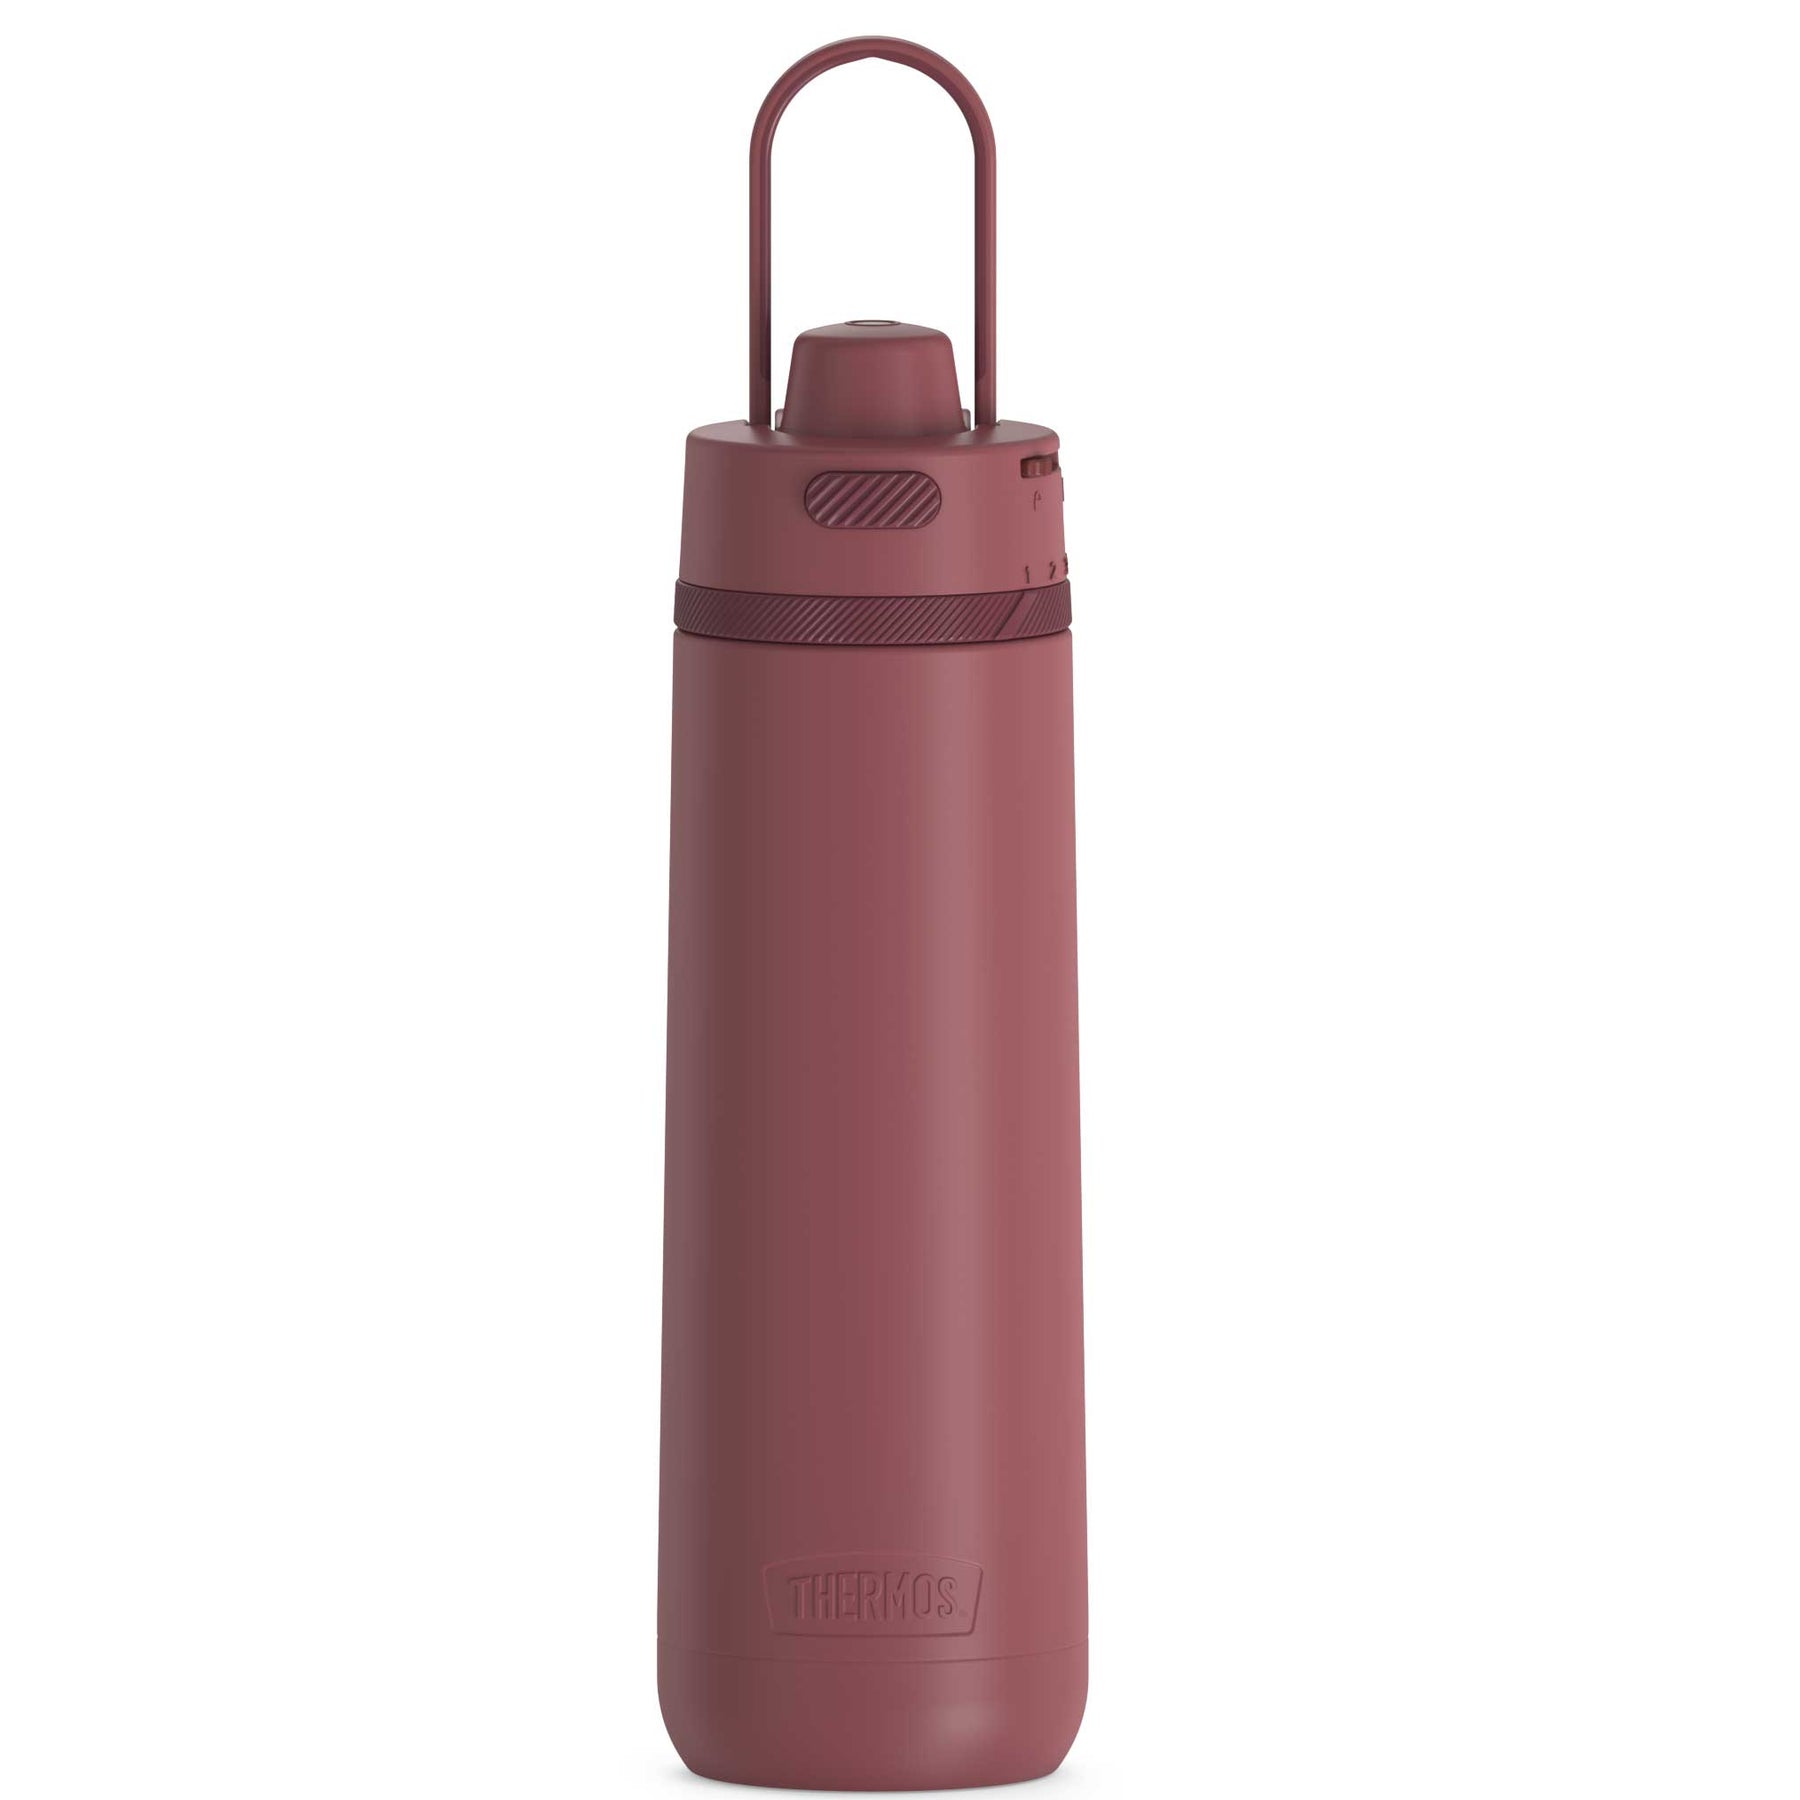 UMSL Triton Store - 24oz Ecovessel Boulder Red Stainless Steel Water Bottle